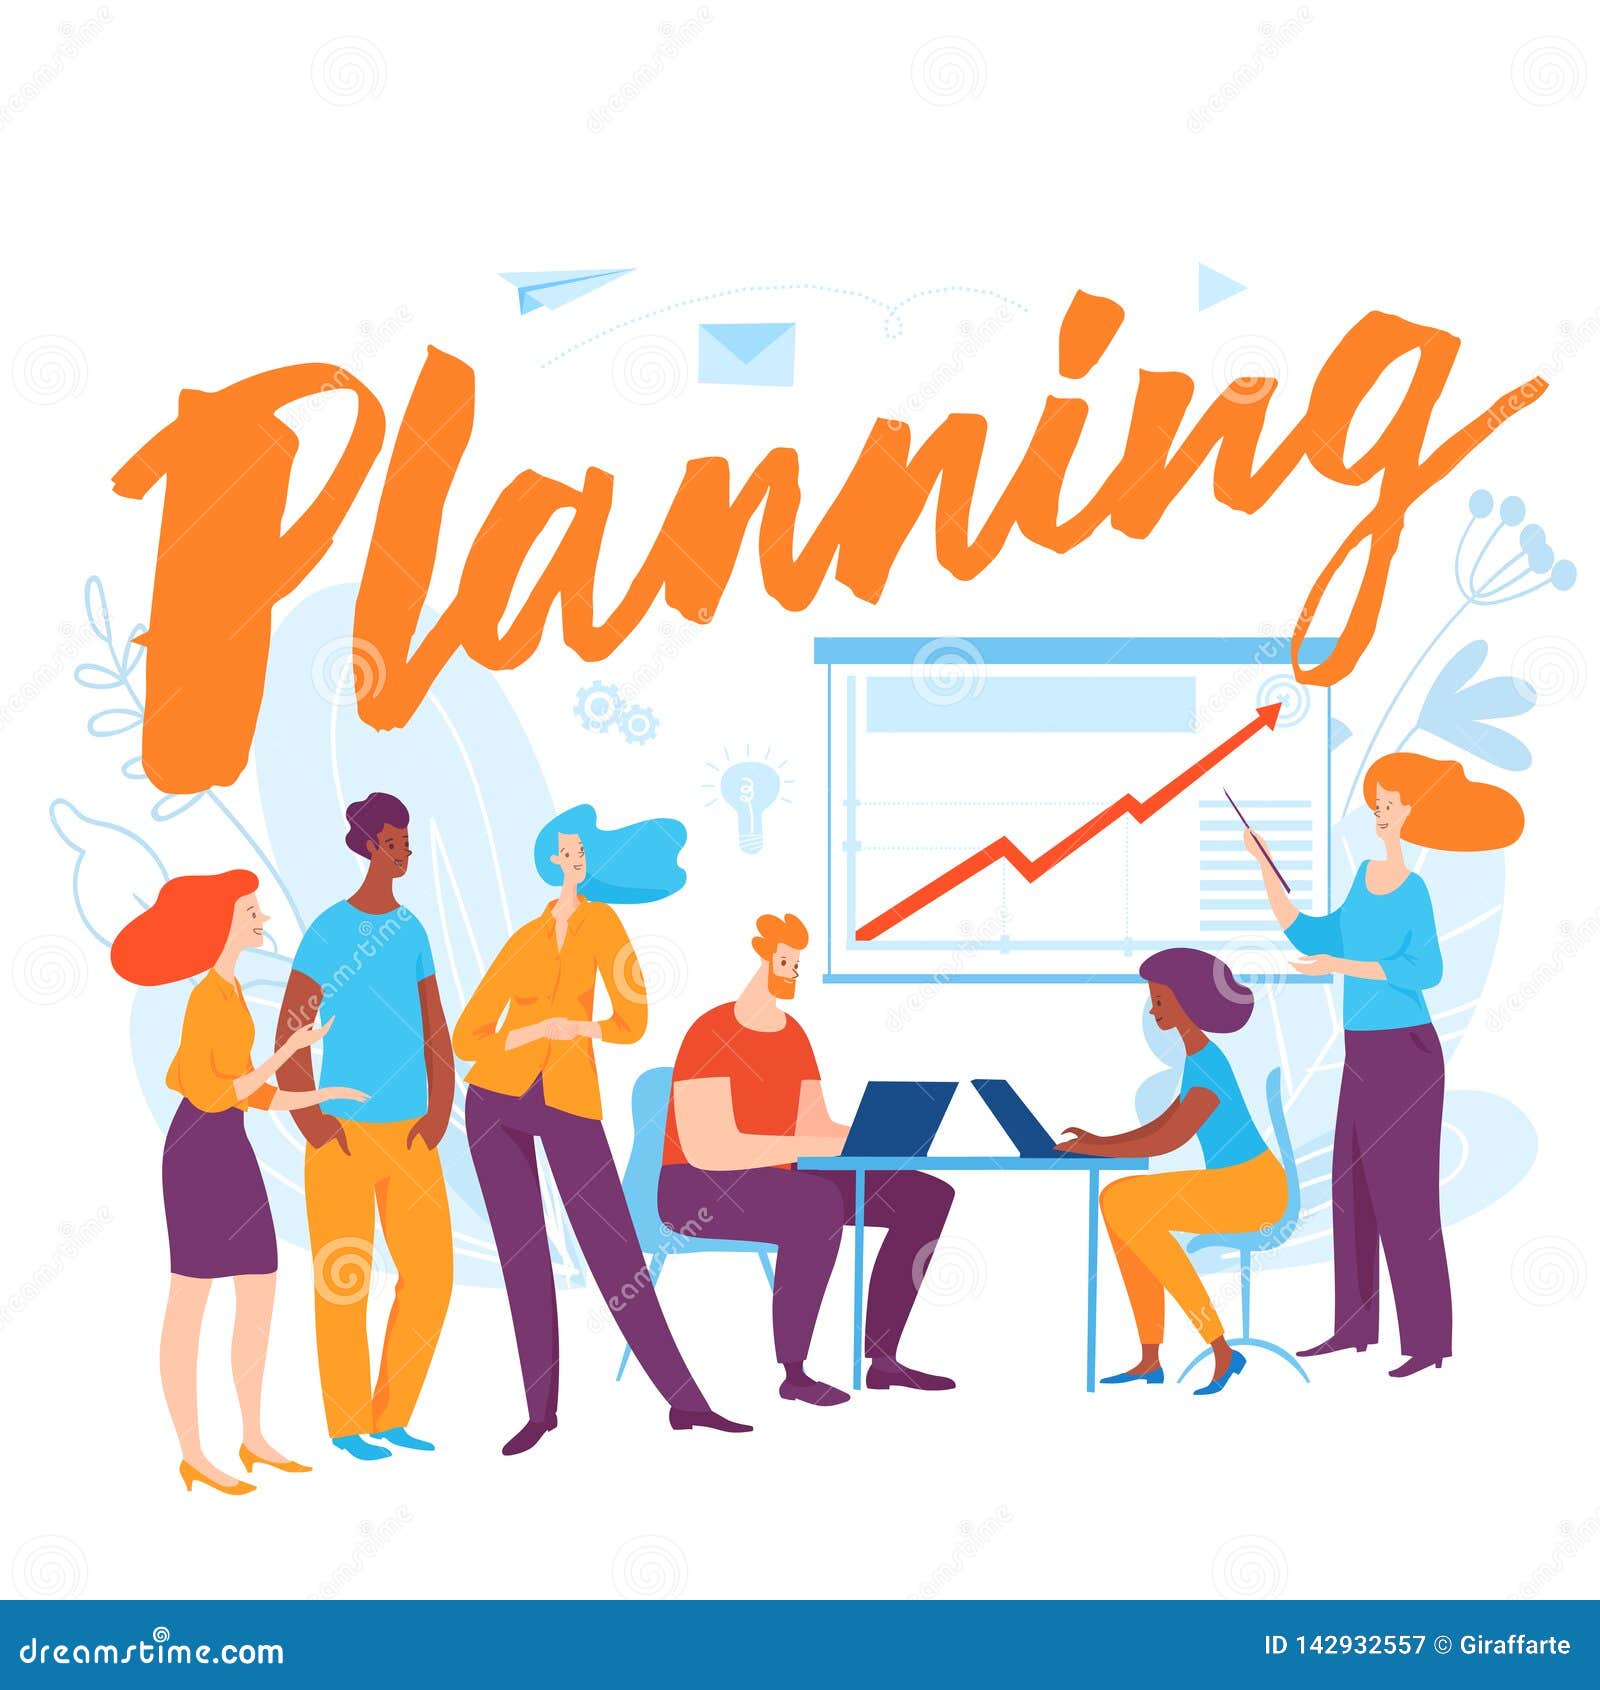 business planning work images